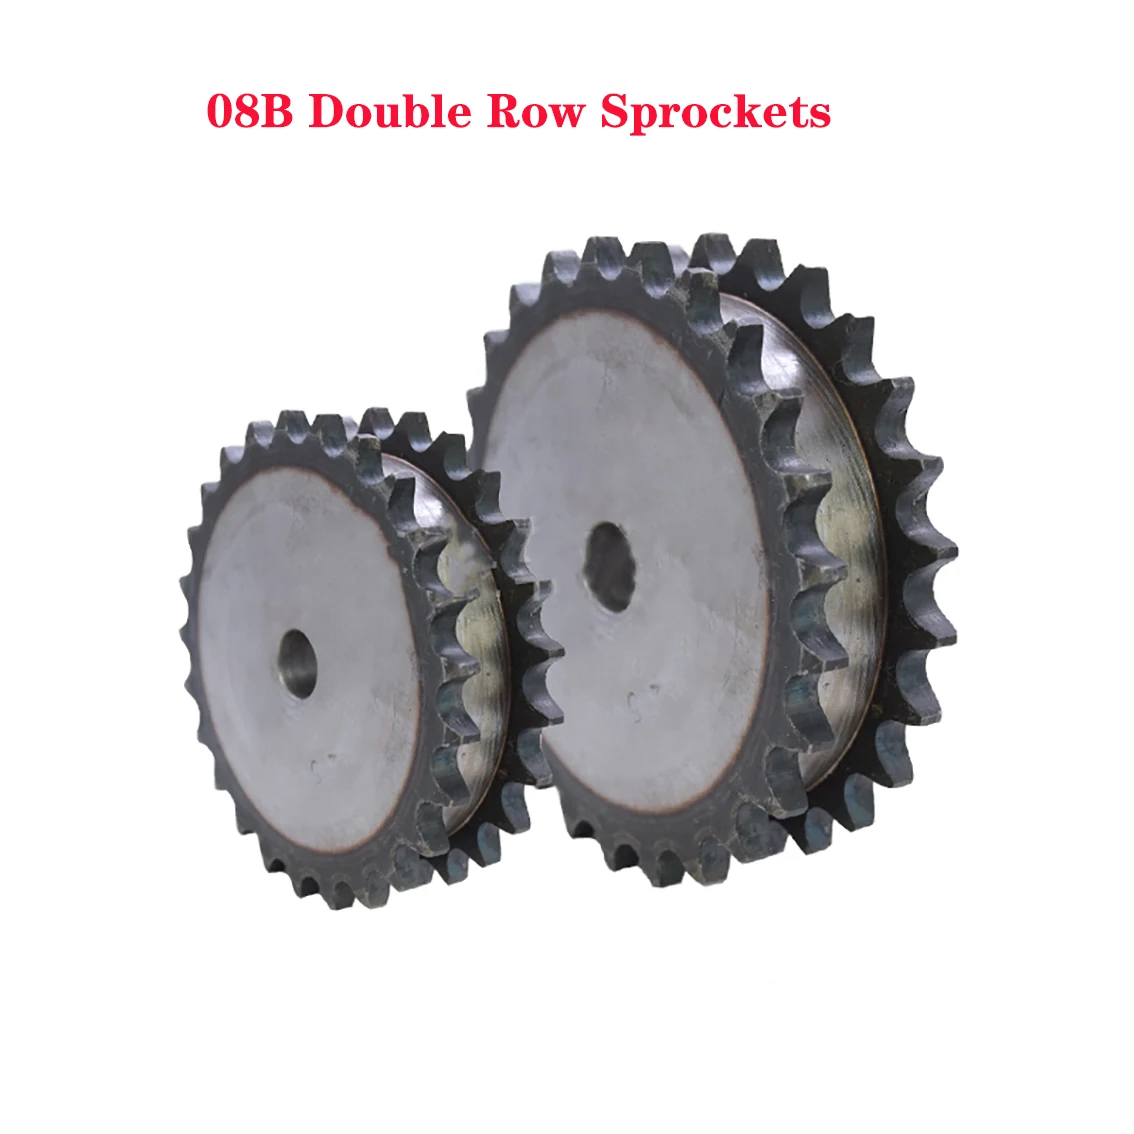 

1Pcs 08B Double Row Sprockets 45# Steel 10-26 Tooth 12mm-18mm Bore Industrial Sprocket Wheel Motor Chain Drive